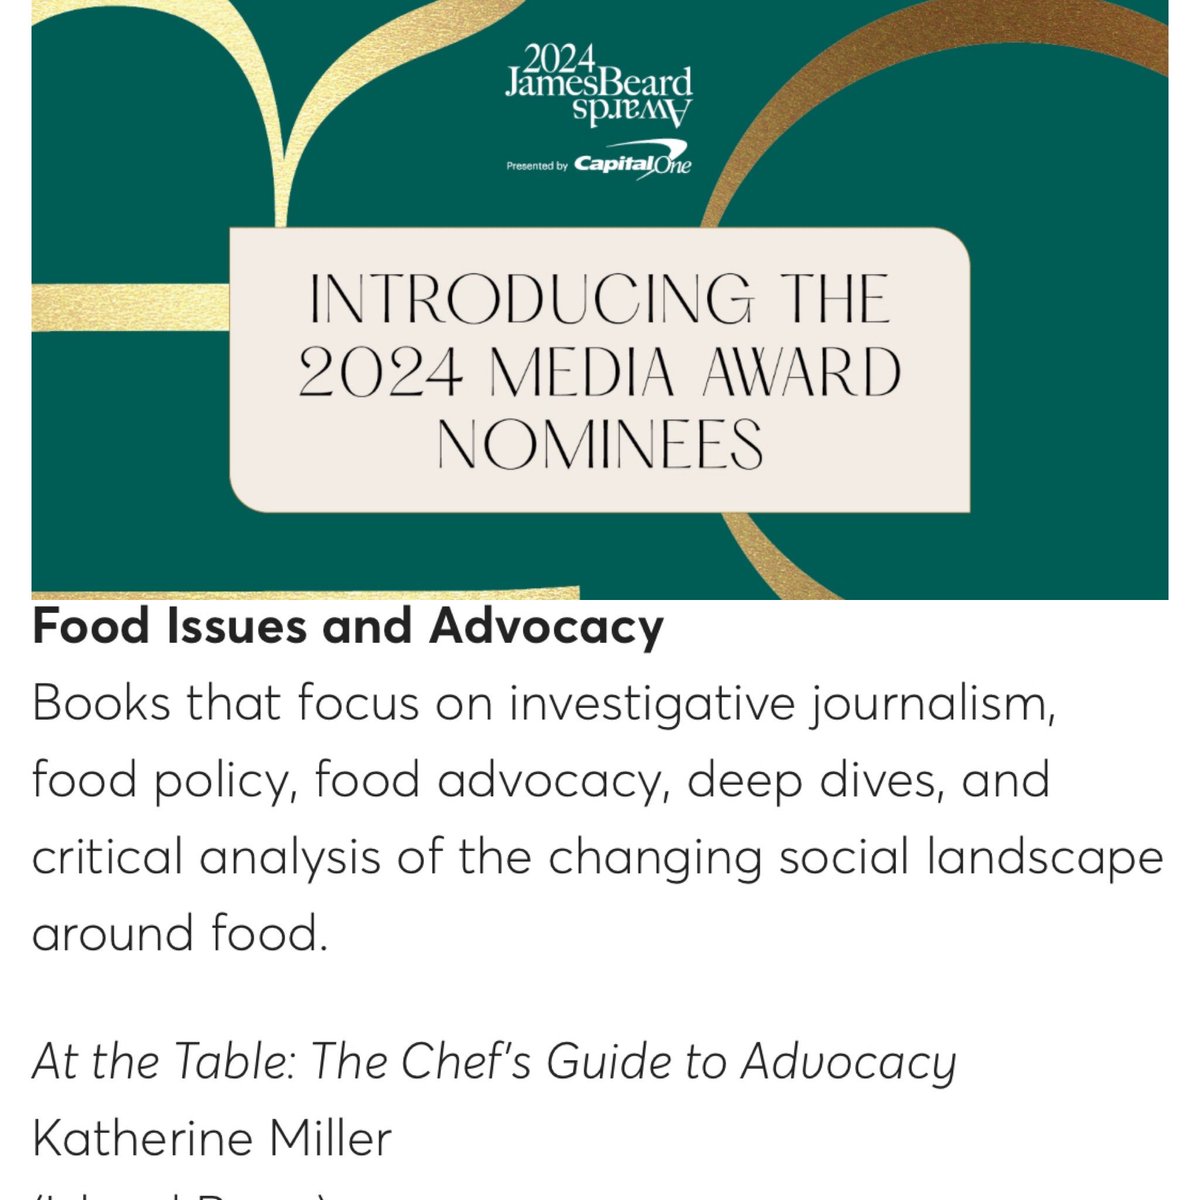 So proud to be a nominee especially alongside so many great women & orgs in DC including @thejemimacode @PatiJinich @WCKitchen and Pasta Social Club DC. Also others I adore incl @KlancyCooks @CivilEats and more. @beardfoundation